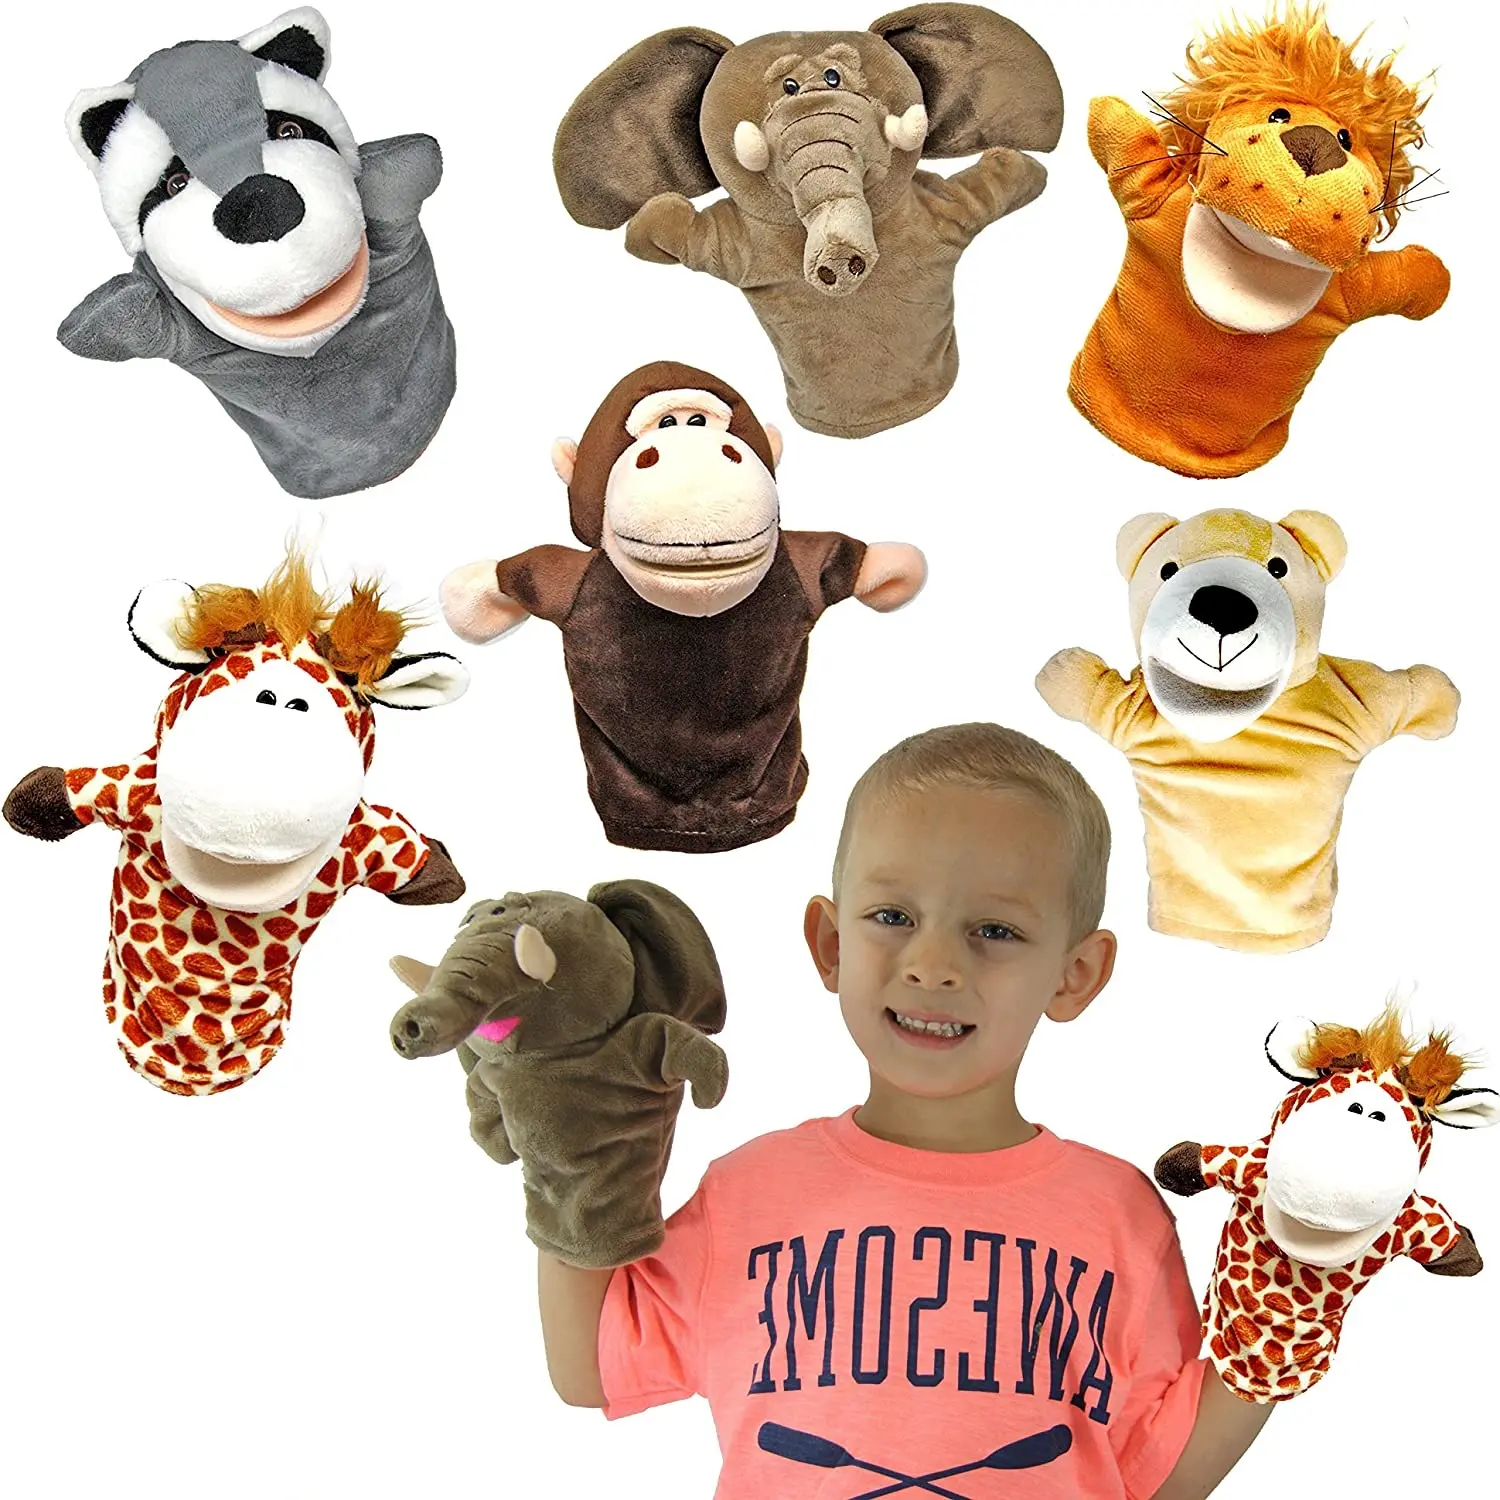 Animal Friends Deluxe Kids Hand Puppets Plush Hand Puppet Toys for Boys and Girls